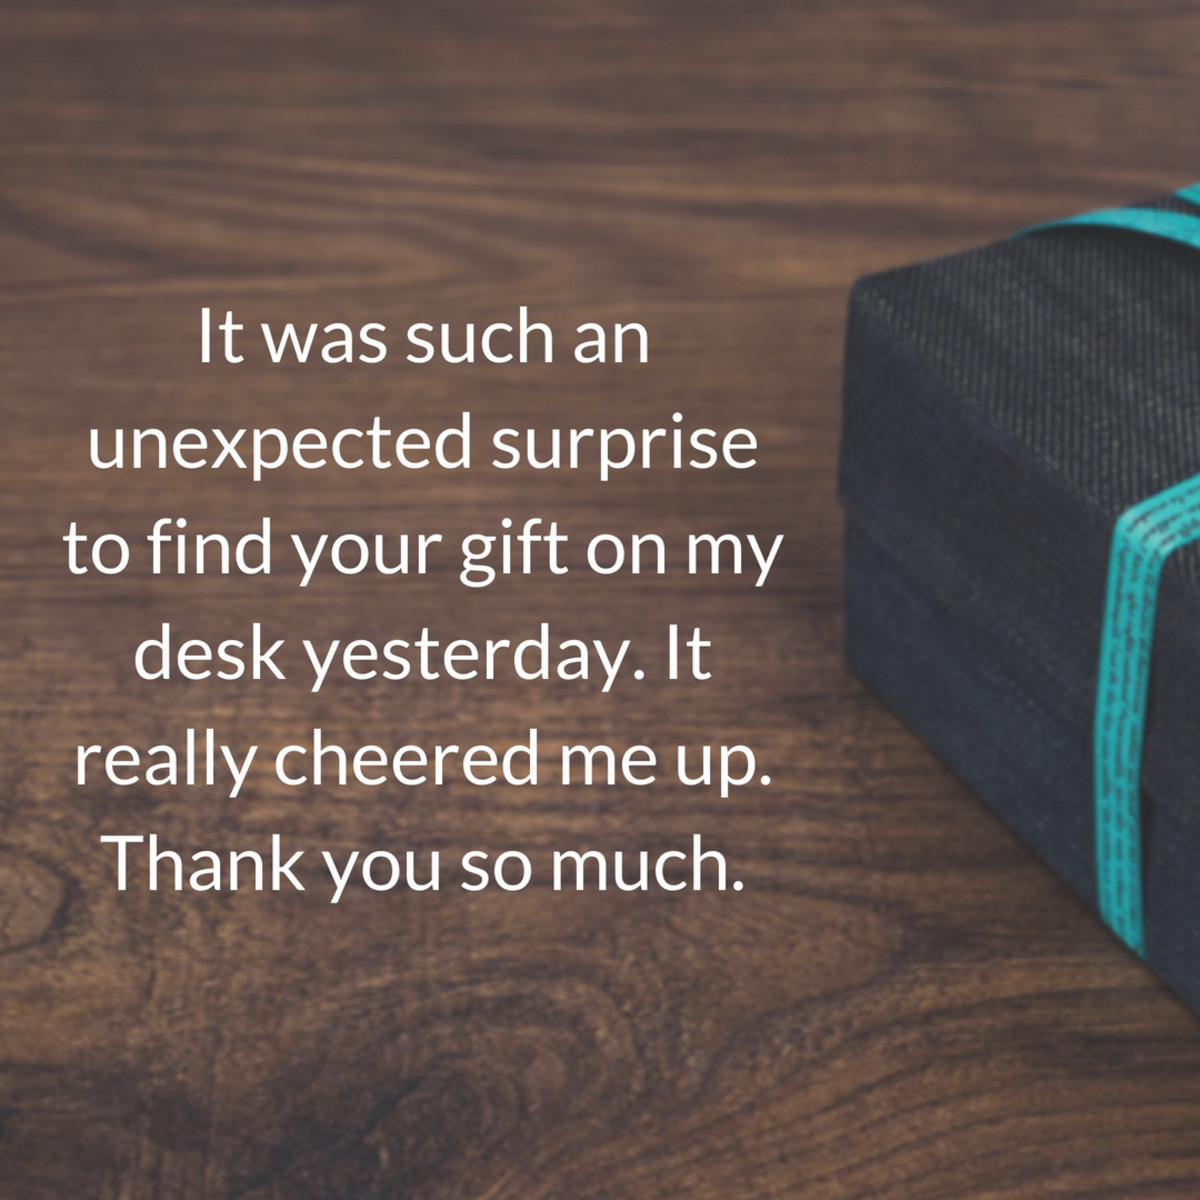 A coworker who goes out of their way to get you a gift is deserving of praise and gratitude.